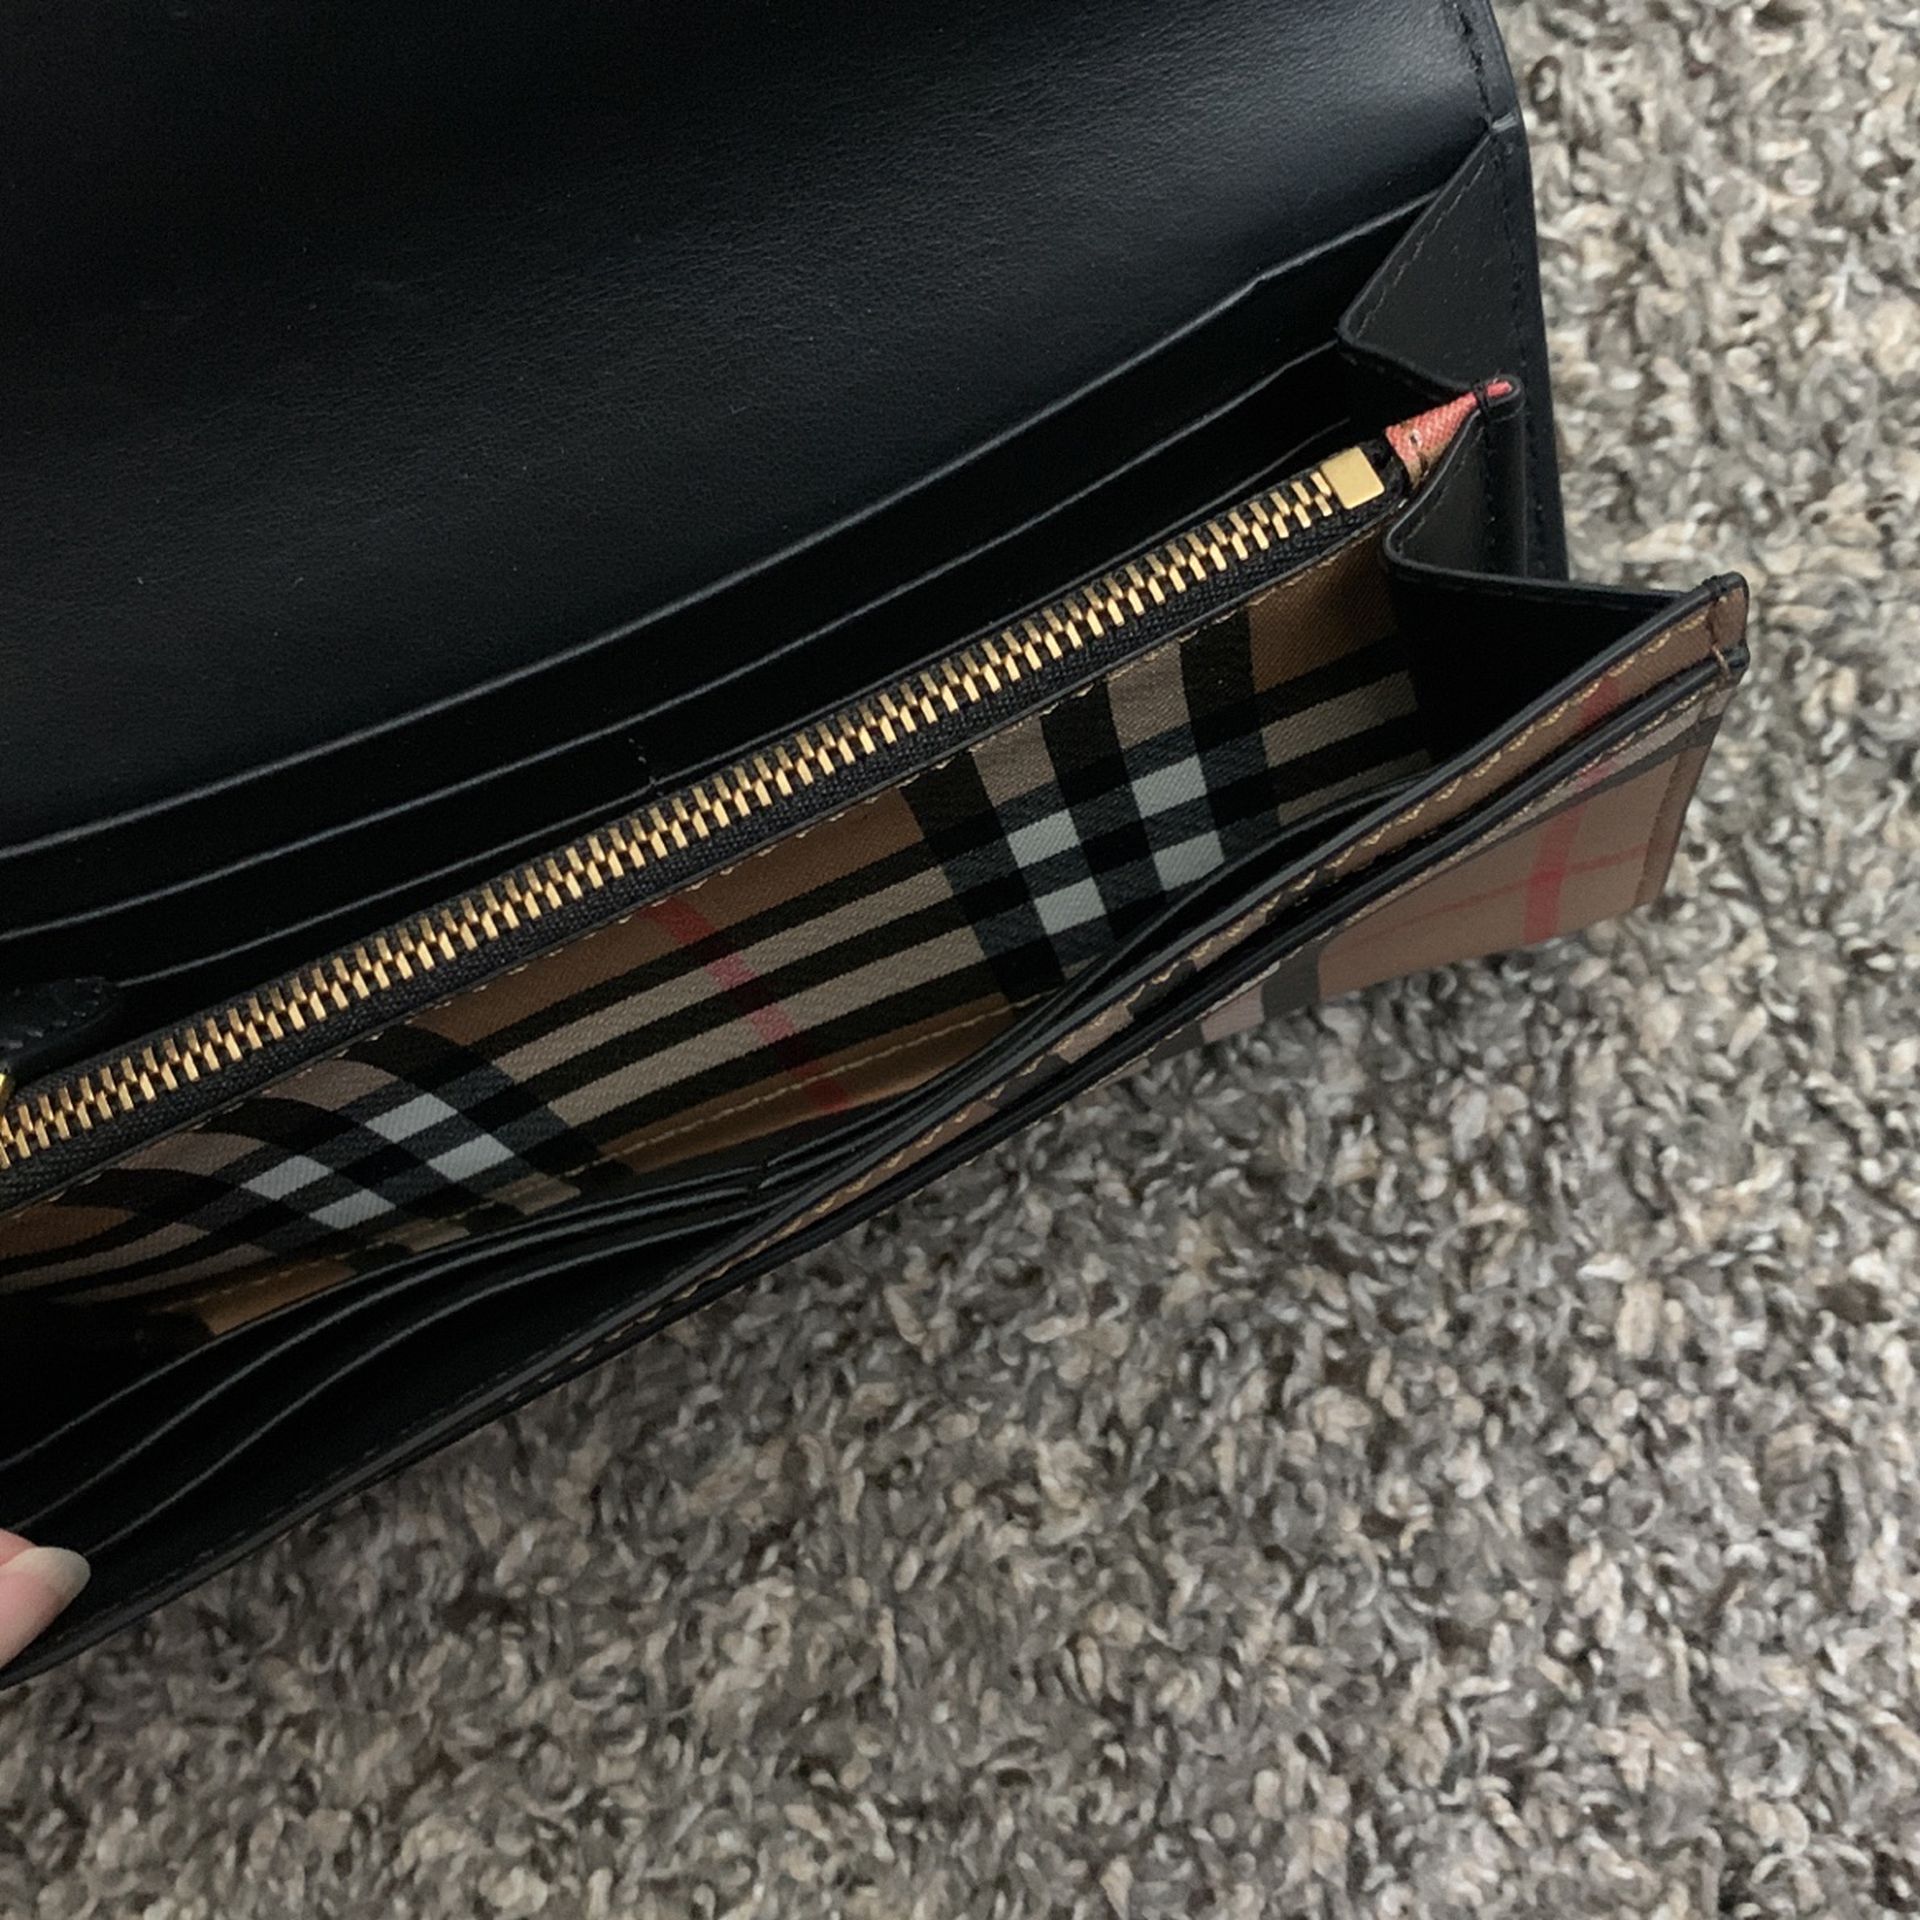 Authentic Burberry Wallet for Sale in Modesto, CA - OfferUp